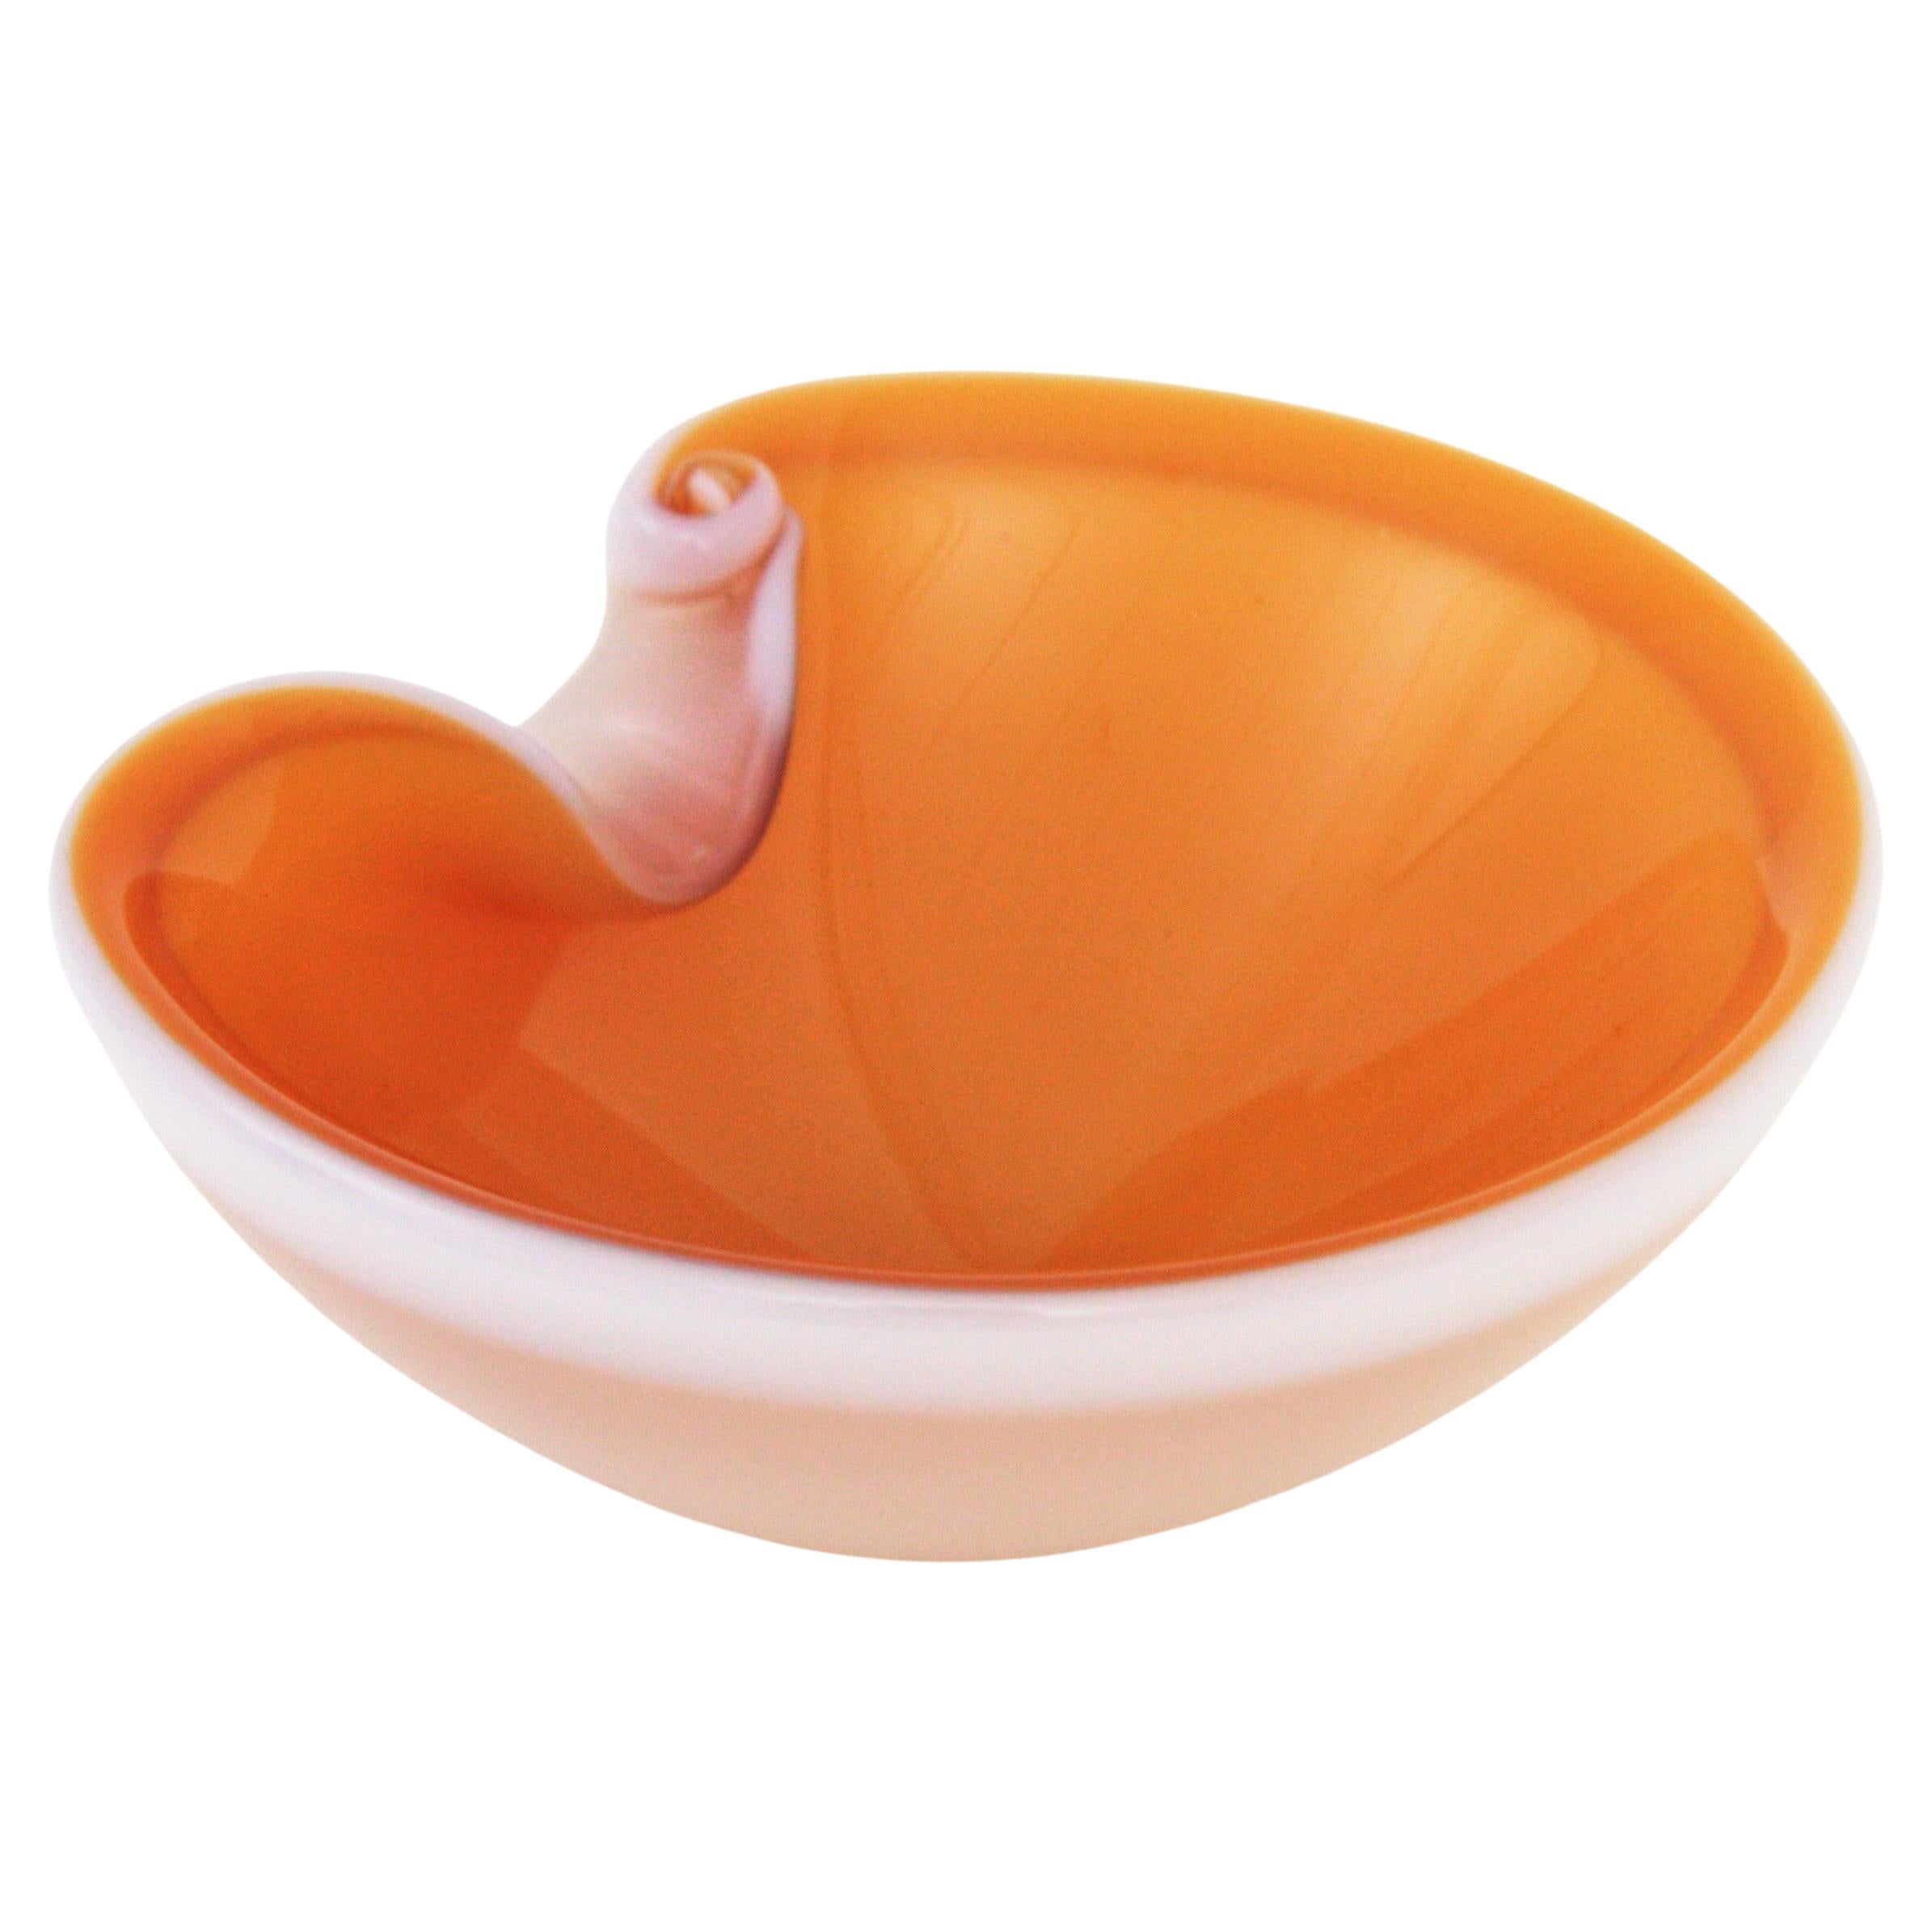 Handblown Murano Art Glass Bowl, Orange and White. Attributed to Seguso, Italy 1960s
This eye-catching Murano glass piece features a shell design bowl with an interior part in orange glass summerged into white glass.
Lovely to be used as dcorative